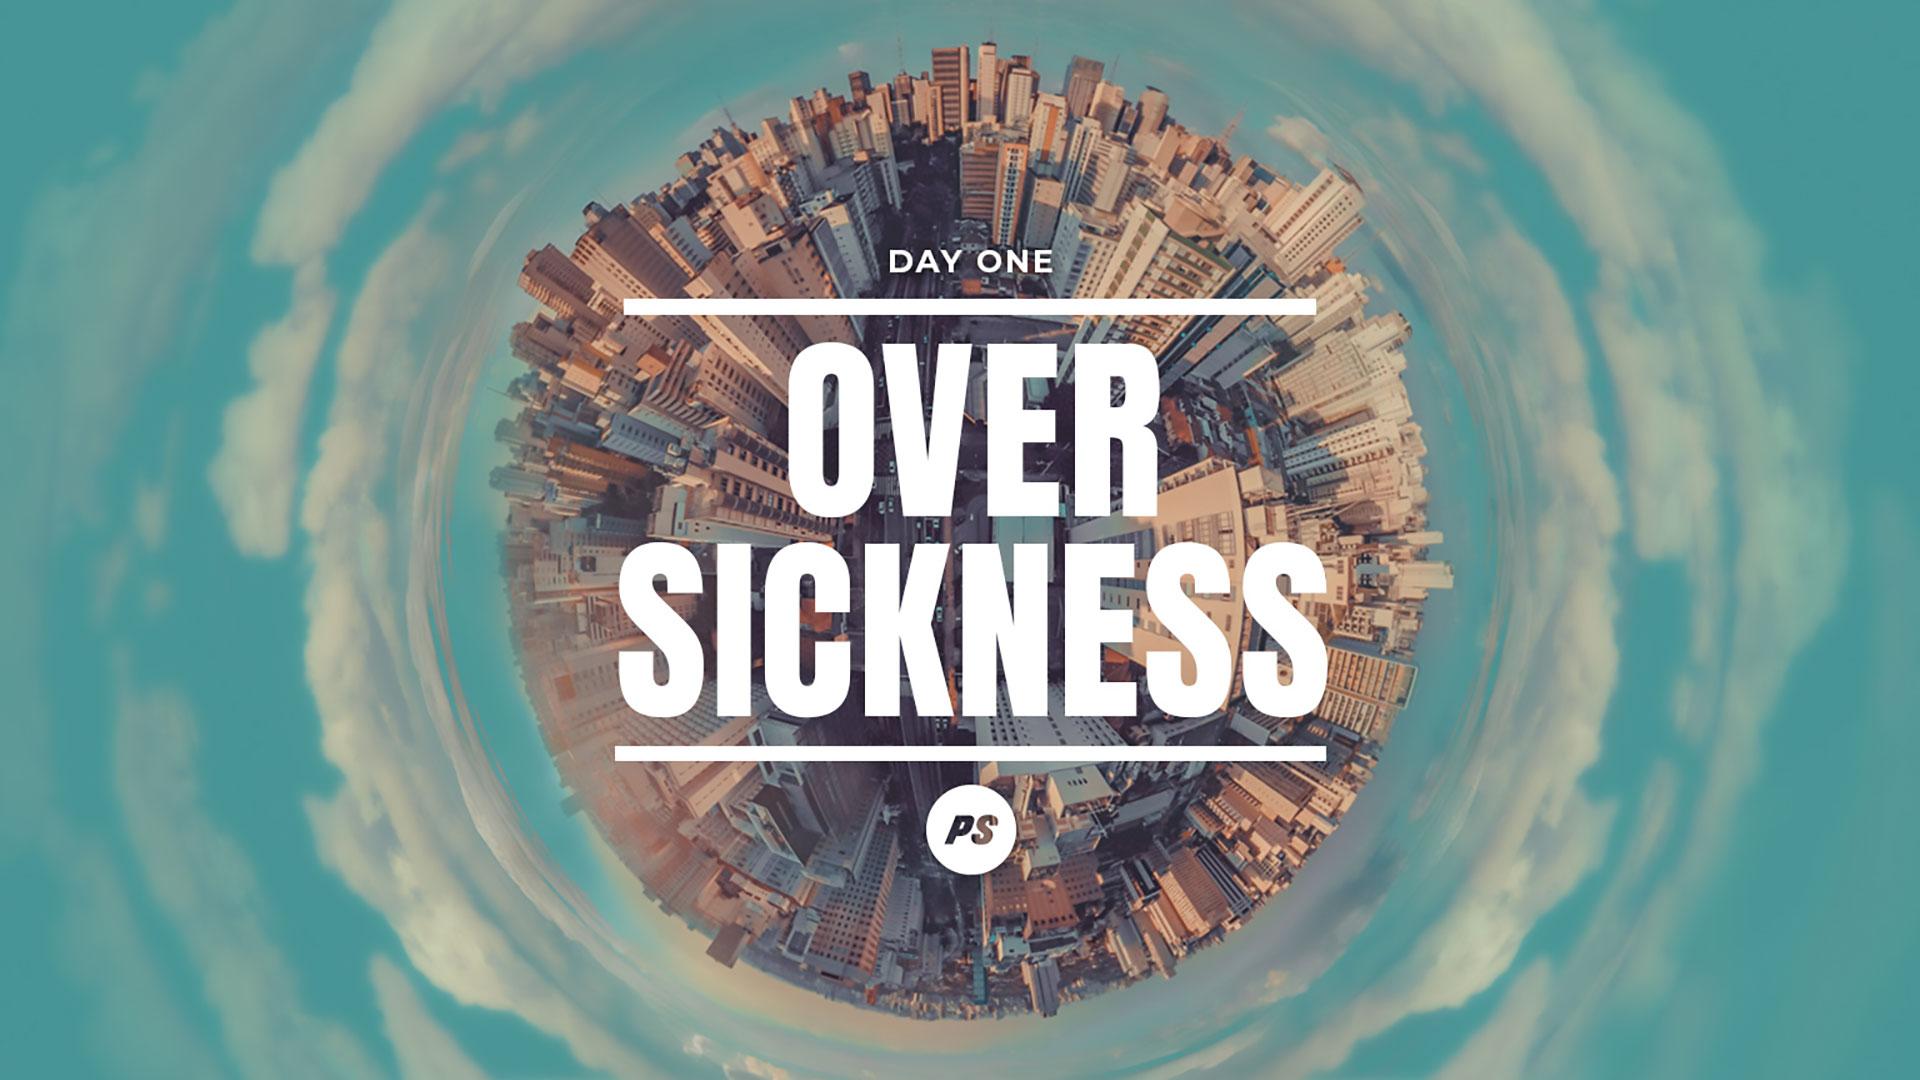 Featured Image for “DAY 1 – He is over sickness”